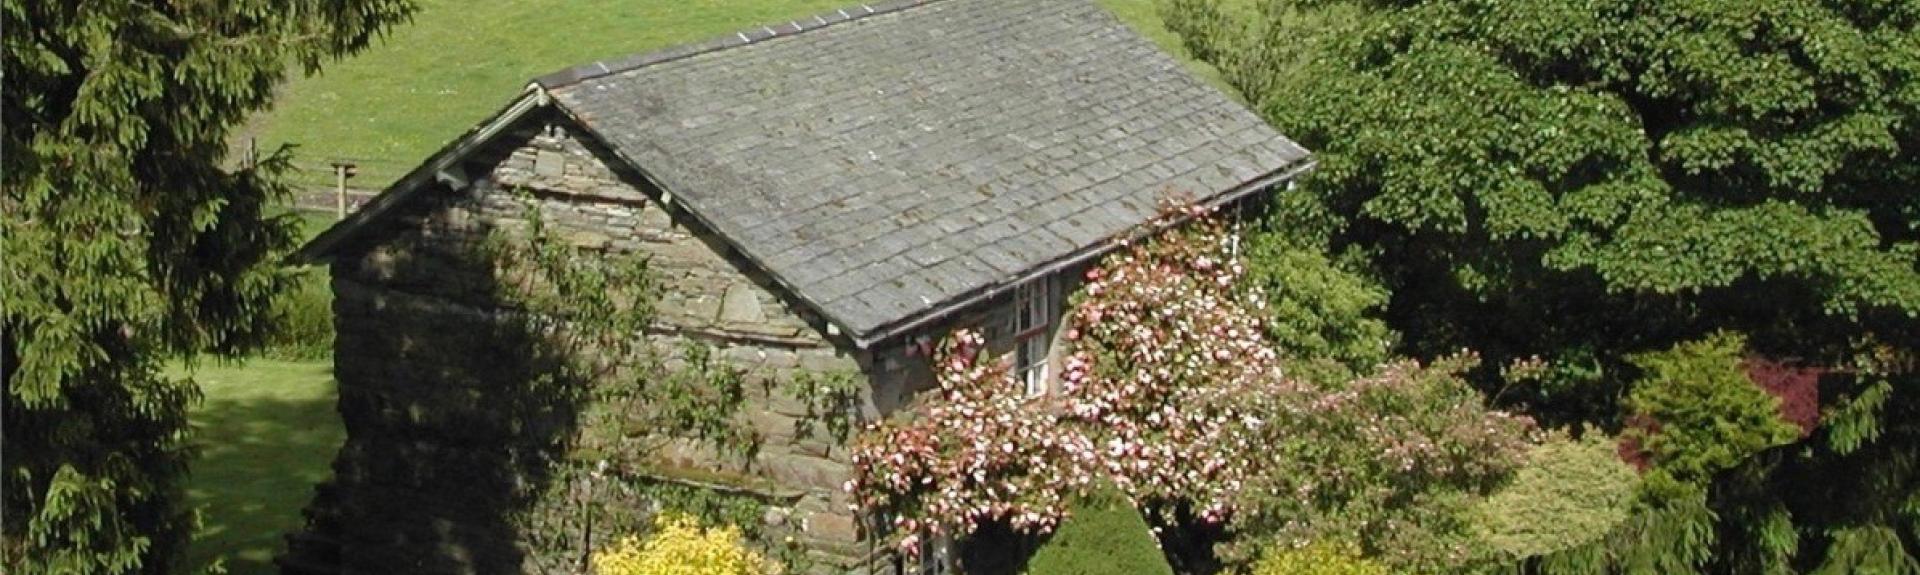 A stone built, slate roofed Lake District holiday cottage surrounded by shrubs and small trees with hilly fields in the distance.